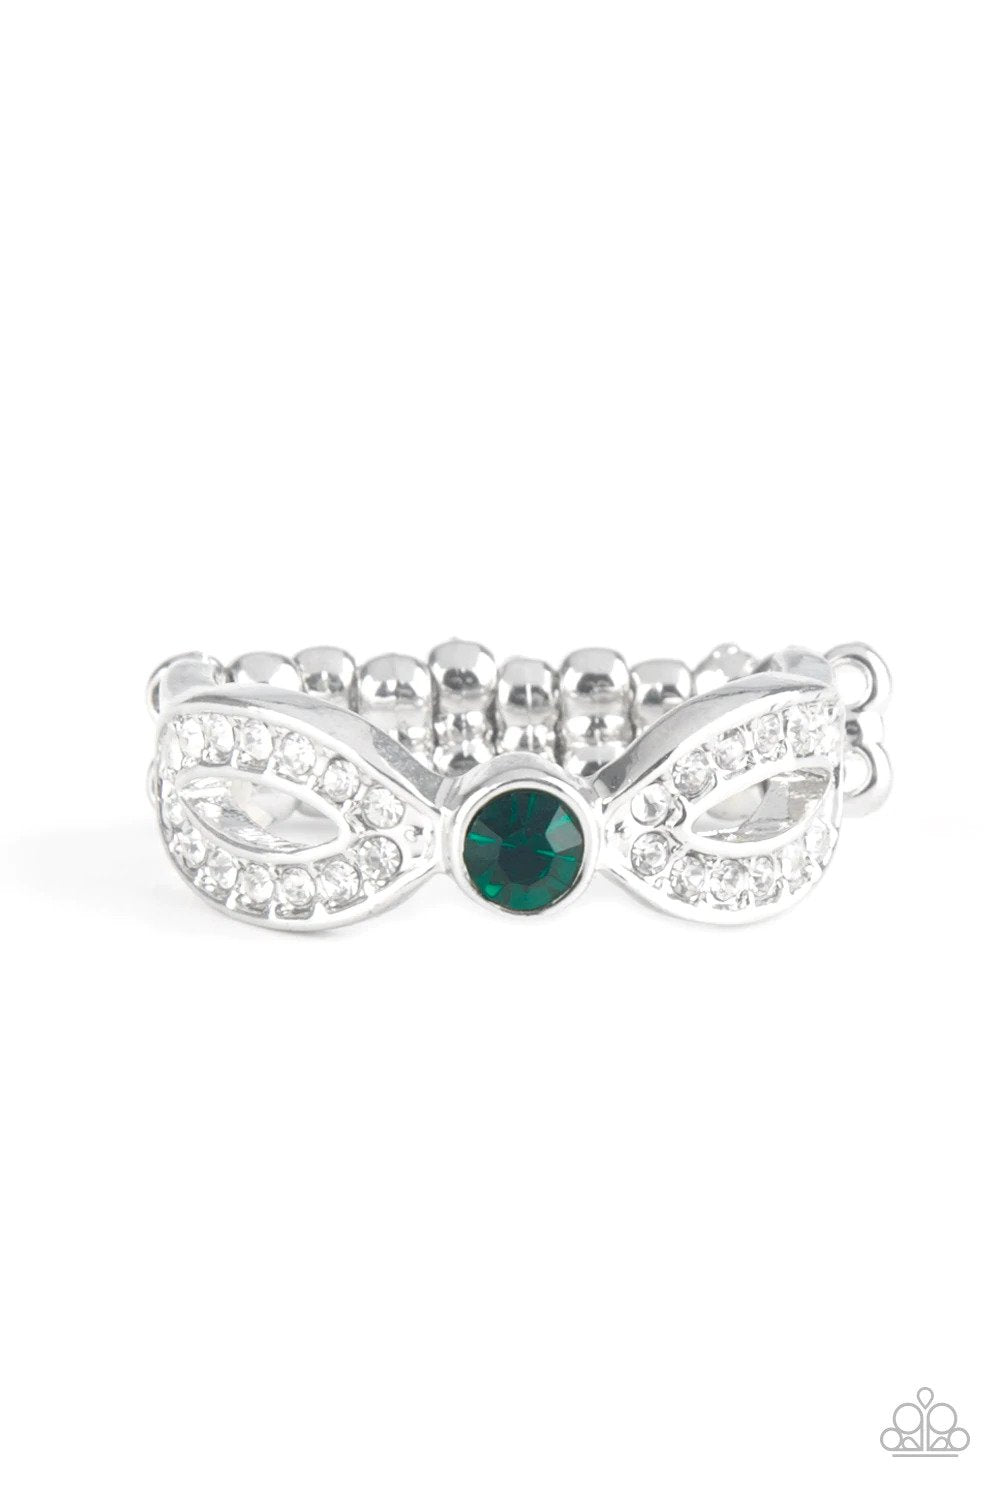 Extra Side of Elegance Green Ring - Paparazzi Accessories- lightbox - CarasShop.com - $5 Jewelry by Cara Jewels